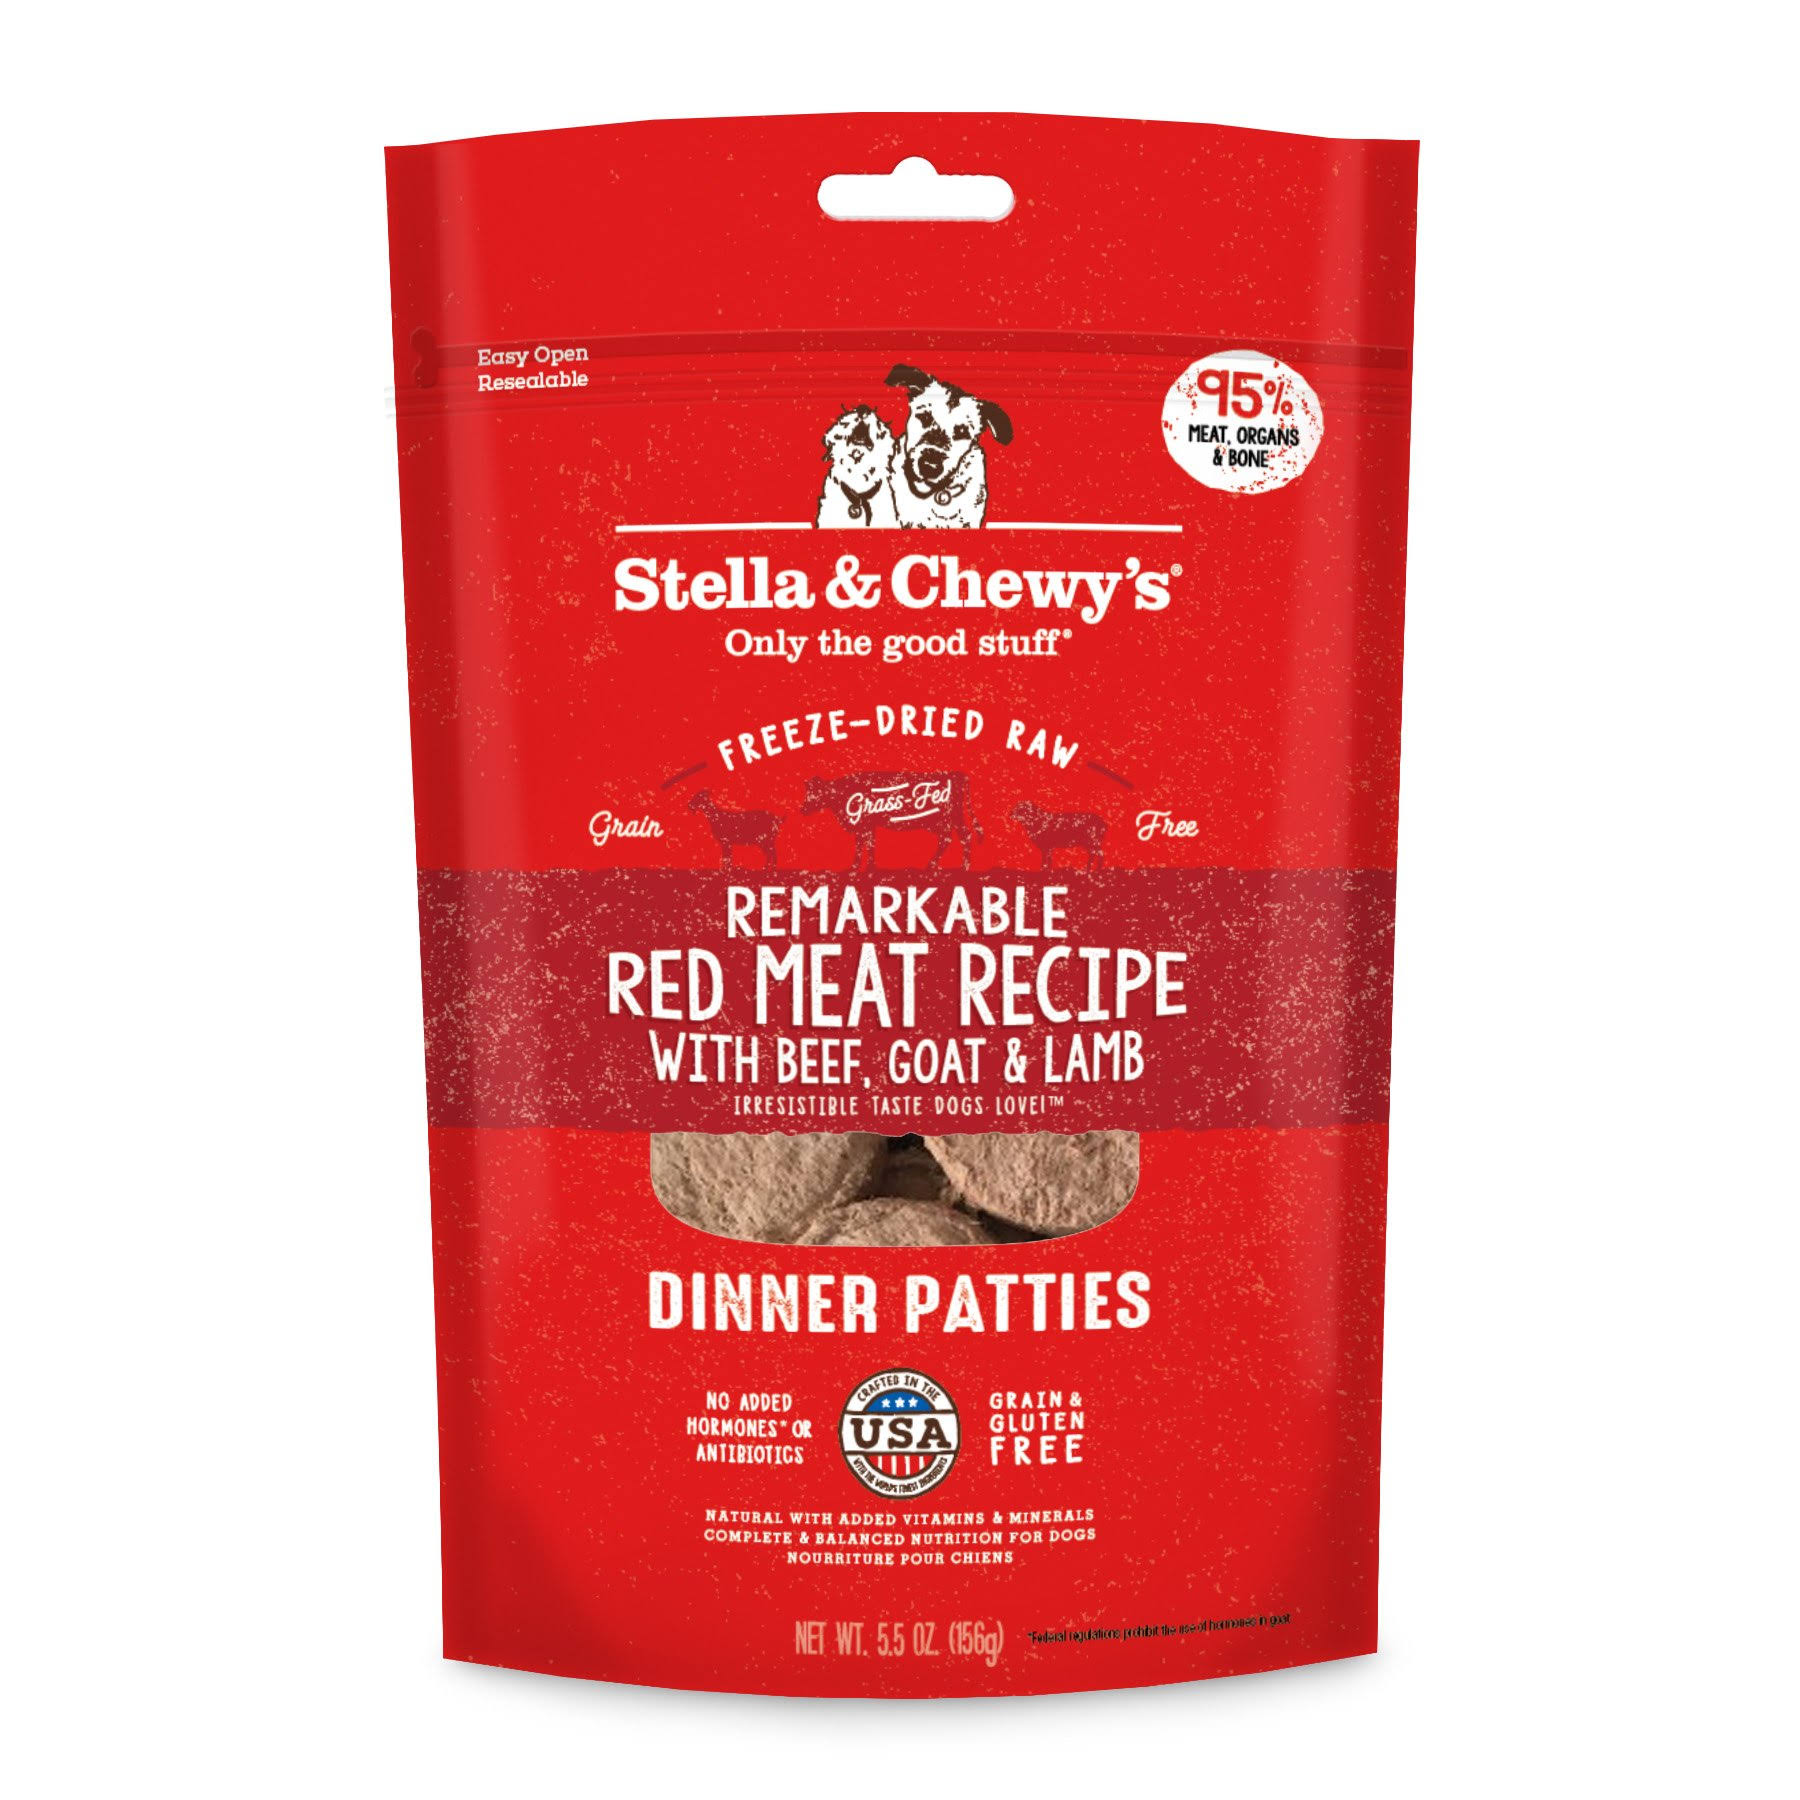 Stella & Chewy's Freeze-Dried Raw Remarkable Red Meat (Beef, Goat & Lamb) Recipe Dinner Patties Dog Food, 5.5 oz. Bag